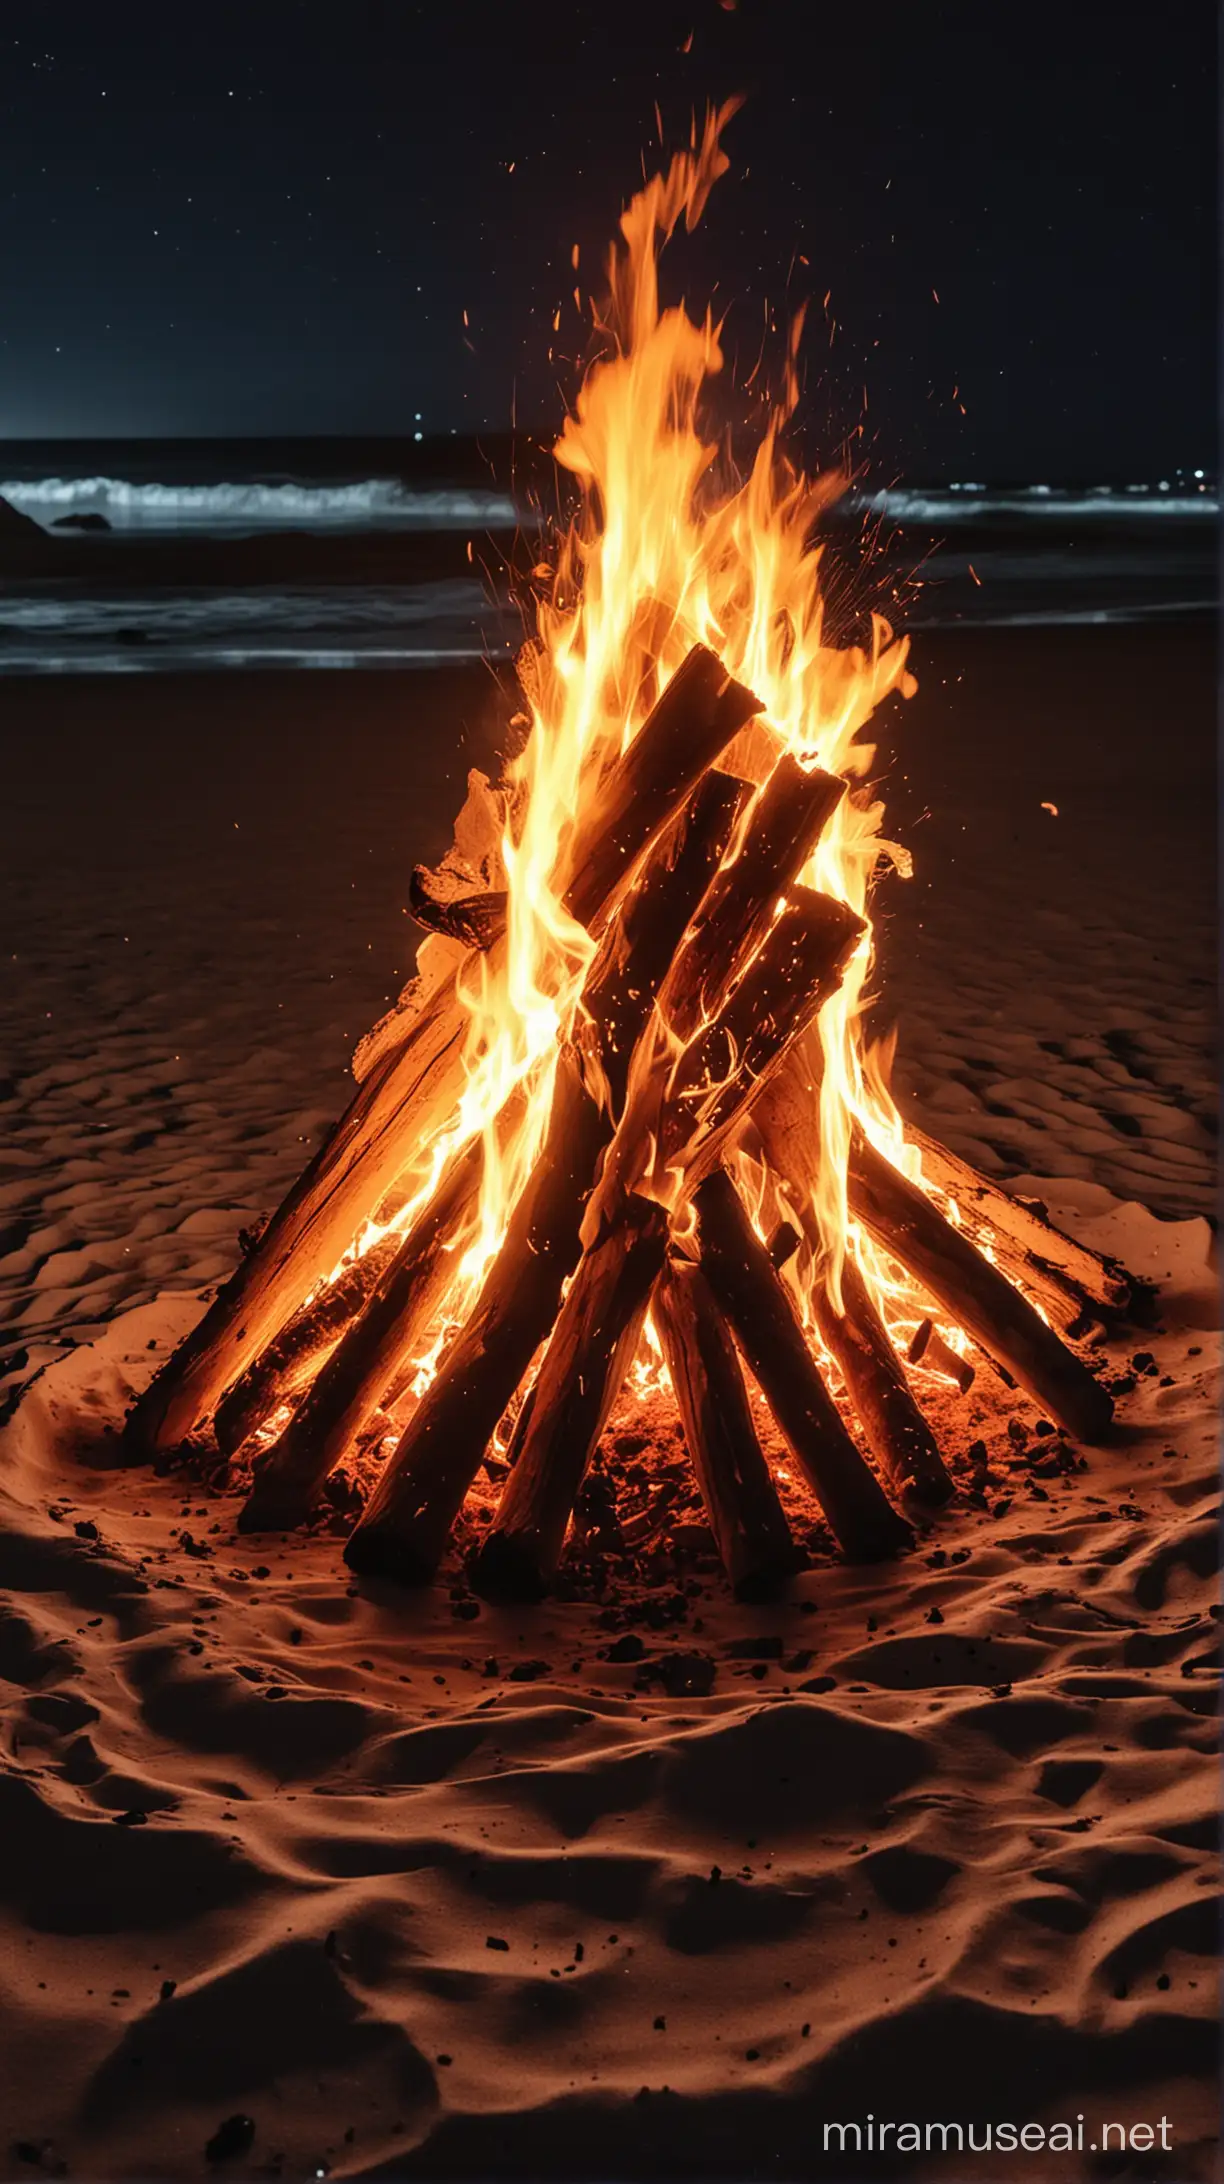 Night Beach Bonfire with Glowing Flames